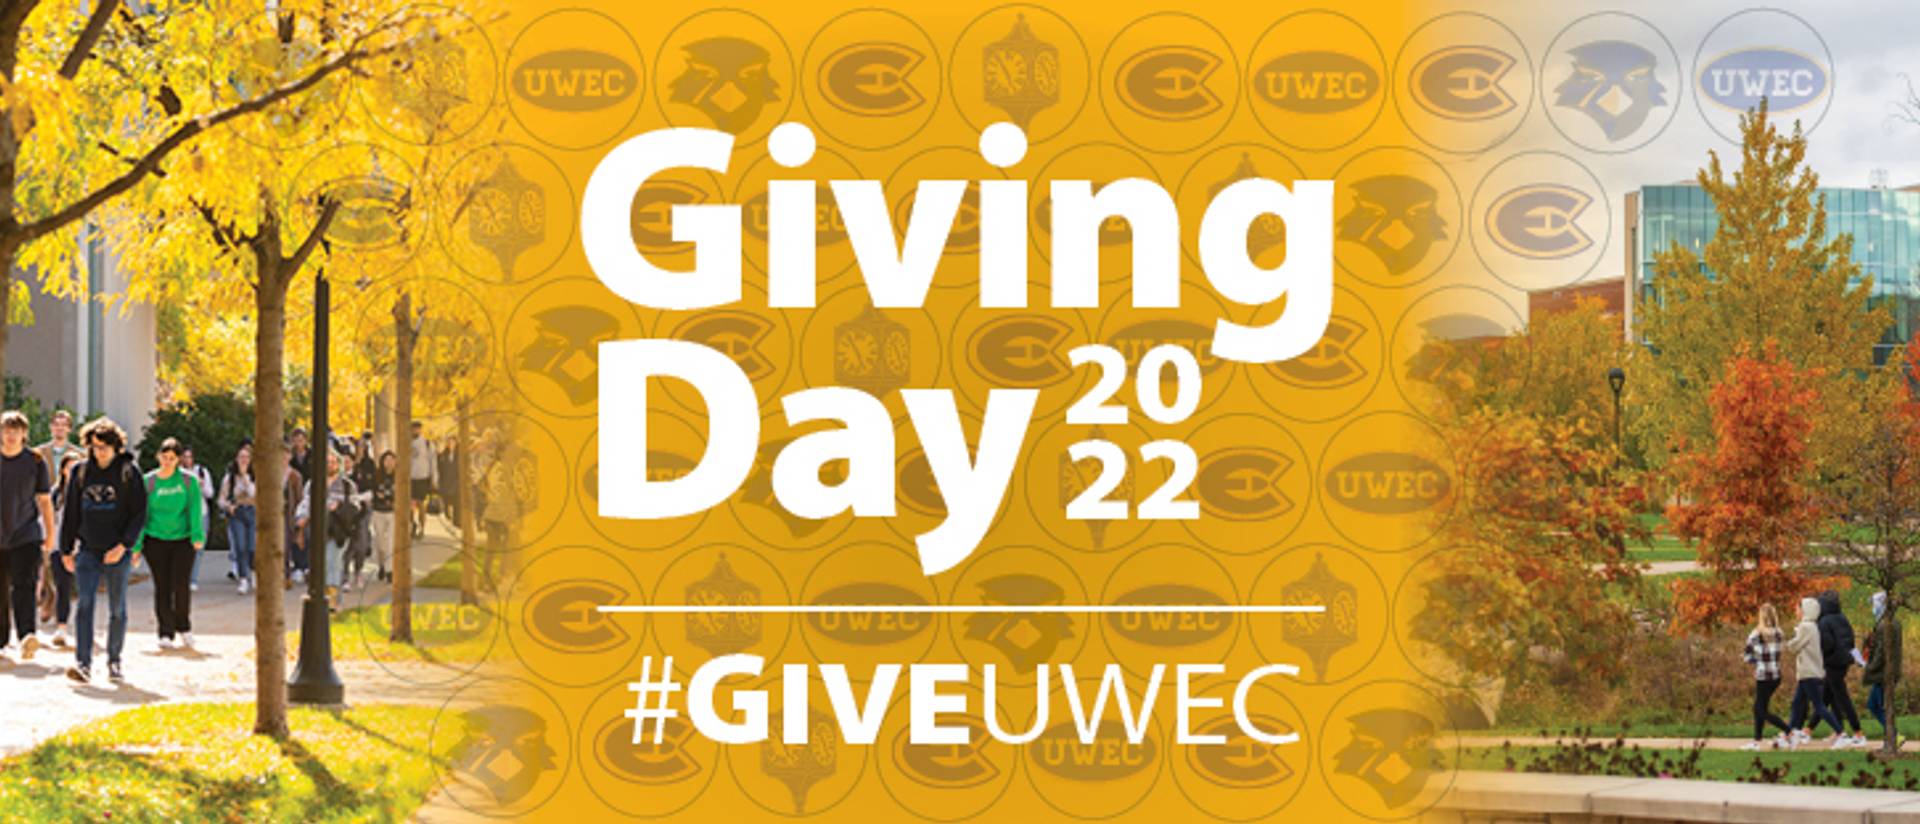 Giving Tuesday 2022 invites donations at https://givingday.uwec.edu